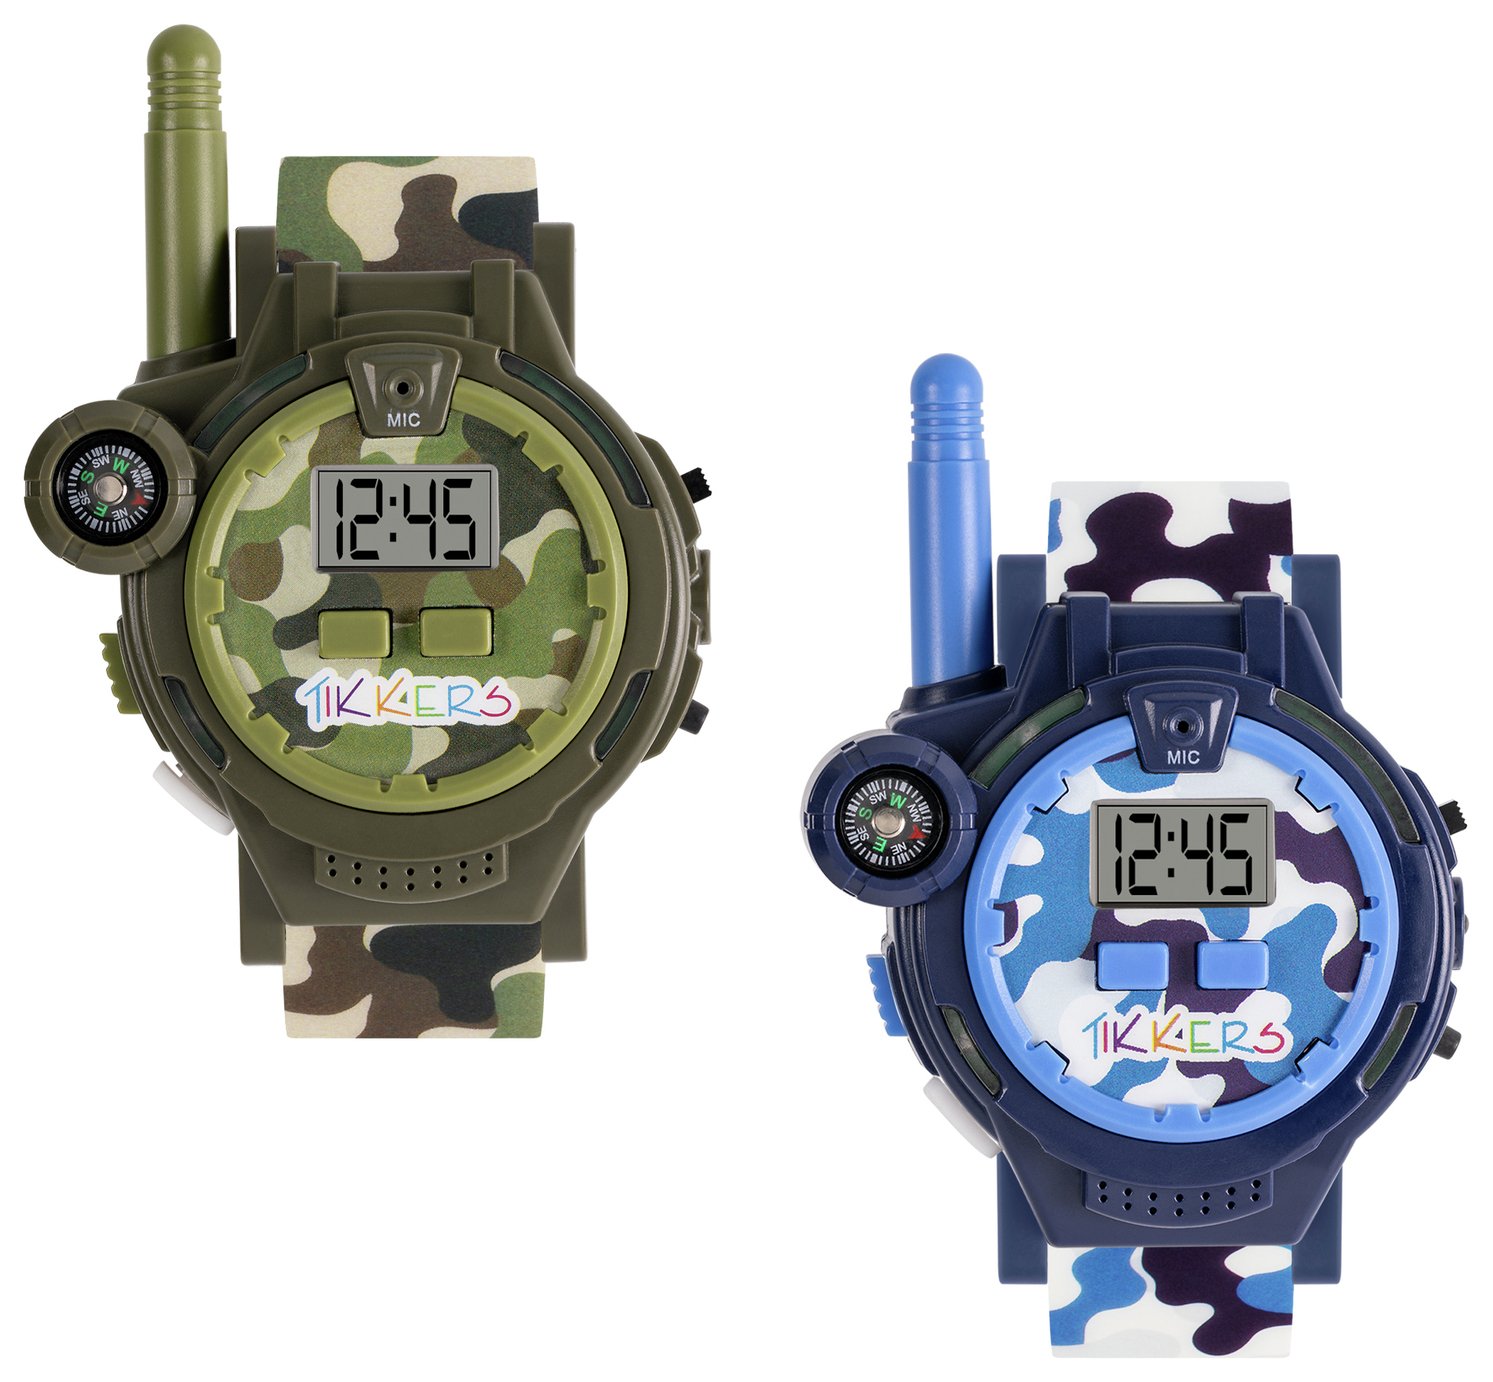 Tikkers Kids Blue and Green Camo Walkie Talkie Watch Set review